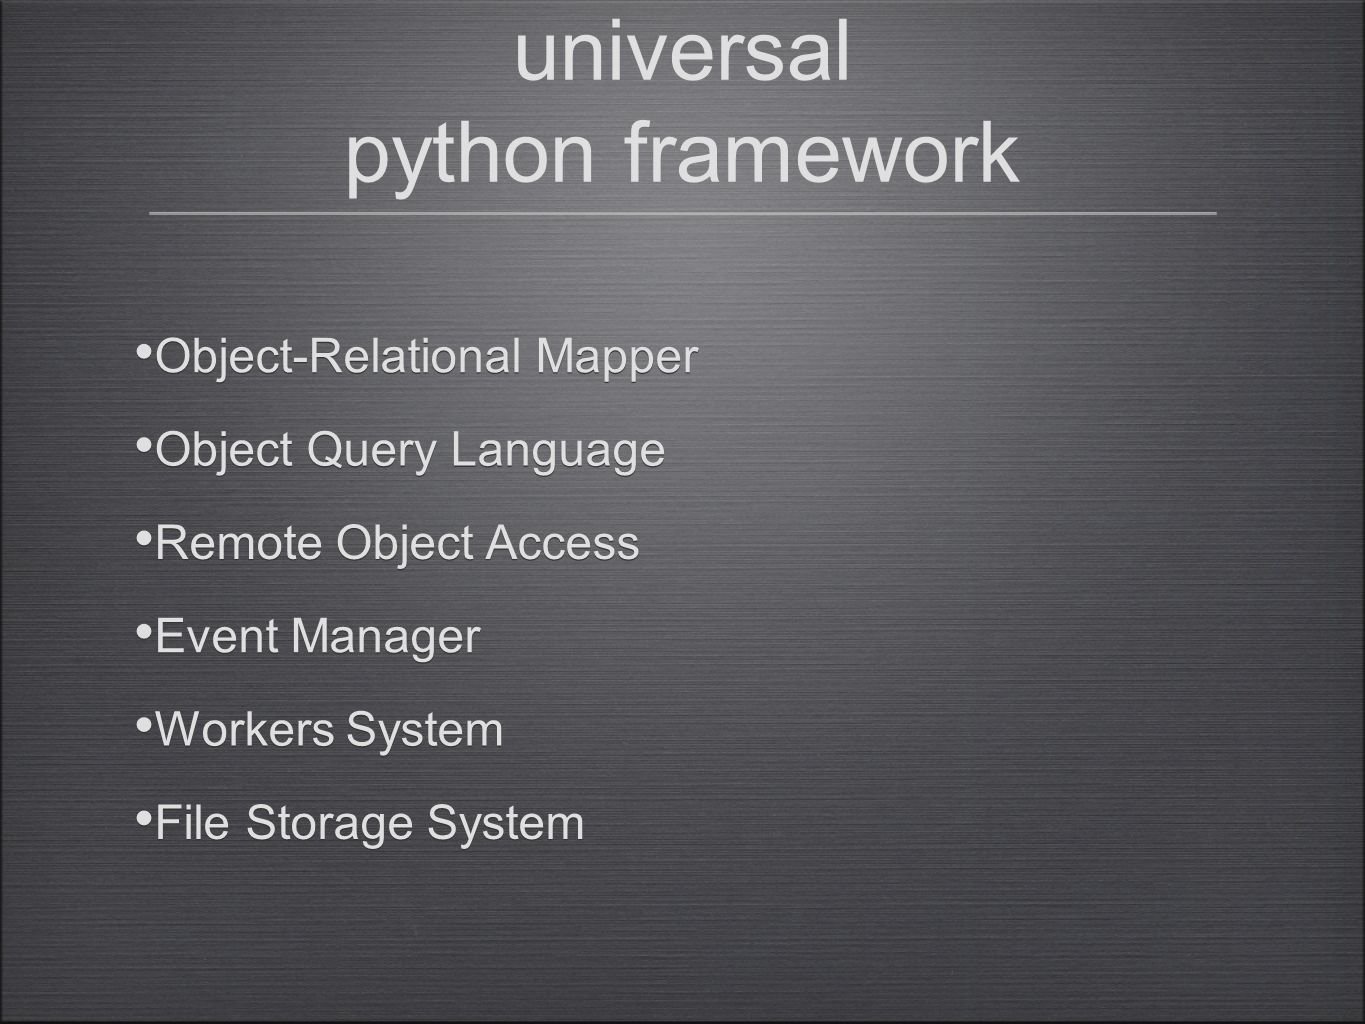 universal python framework Workers System Event Manager Remote Object Access Object Query Language Object-Relational Mapper File Storage System